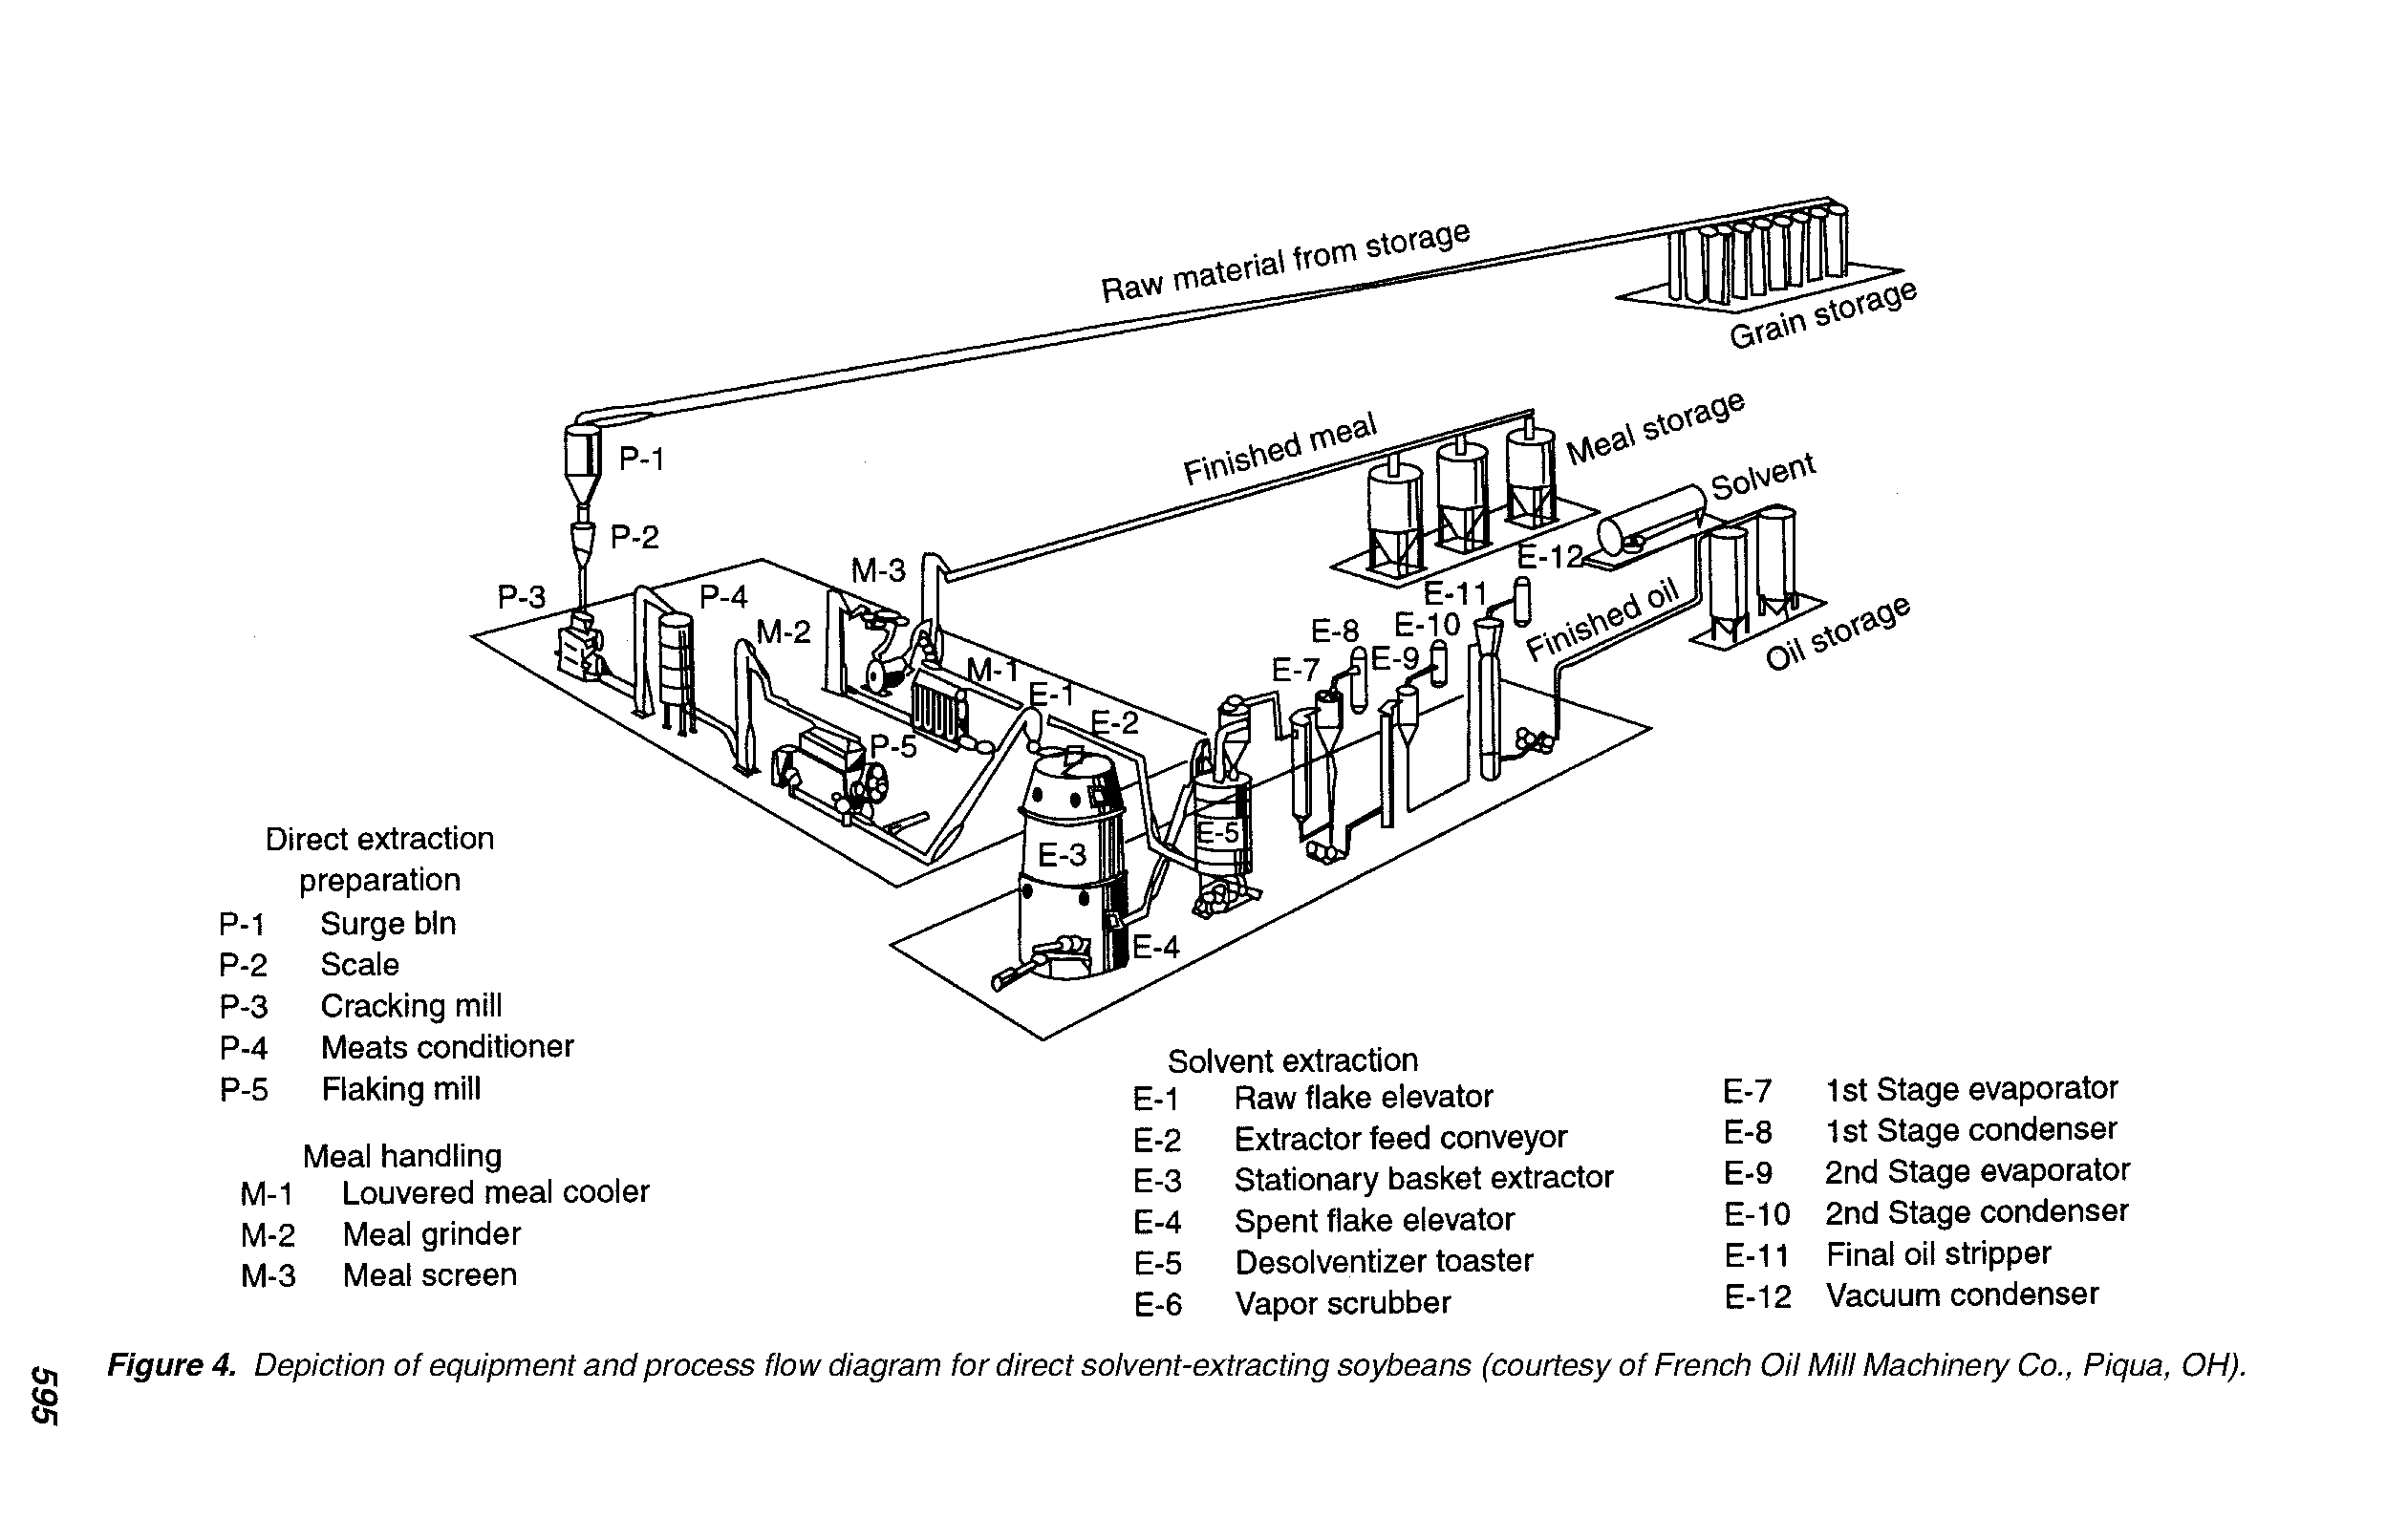 Figure 4. Depiction of equipment and process flow diagram for direct solvent-extracting soybeans (courtesy of French Oil Mill Machinery Co., Piqua, OH).